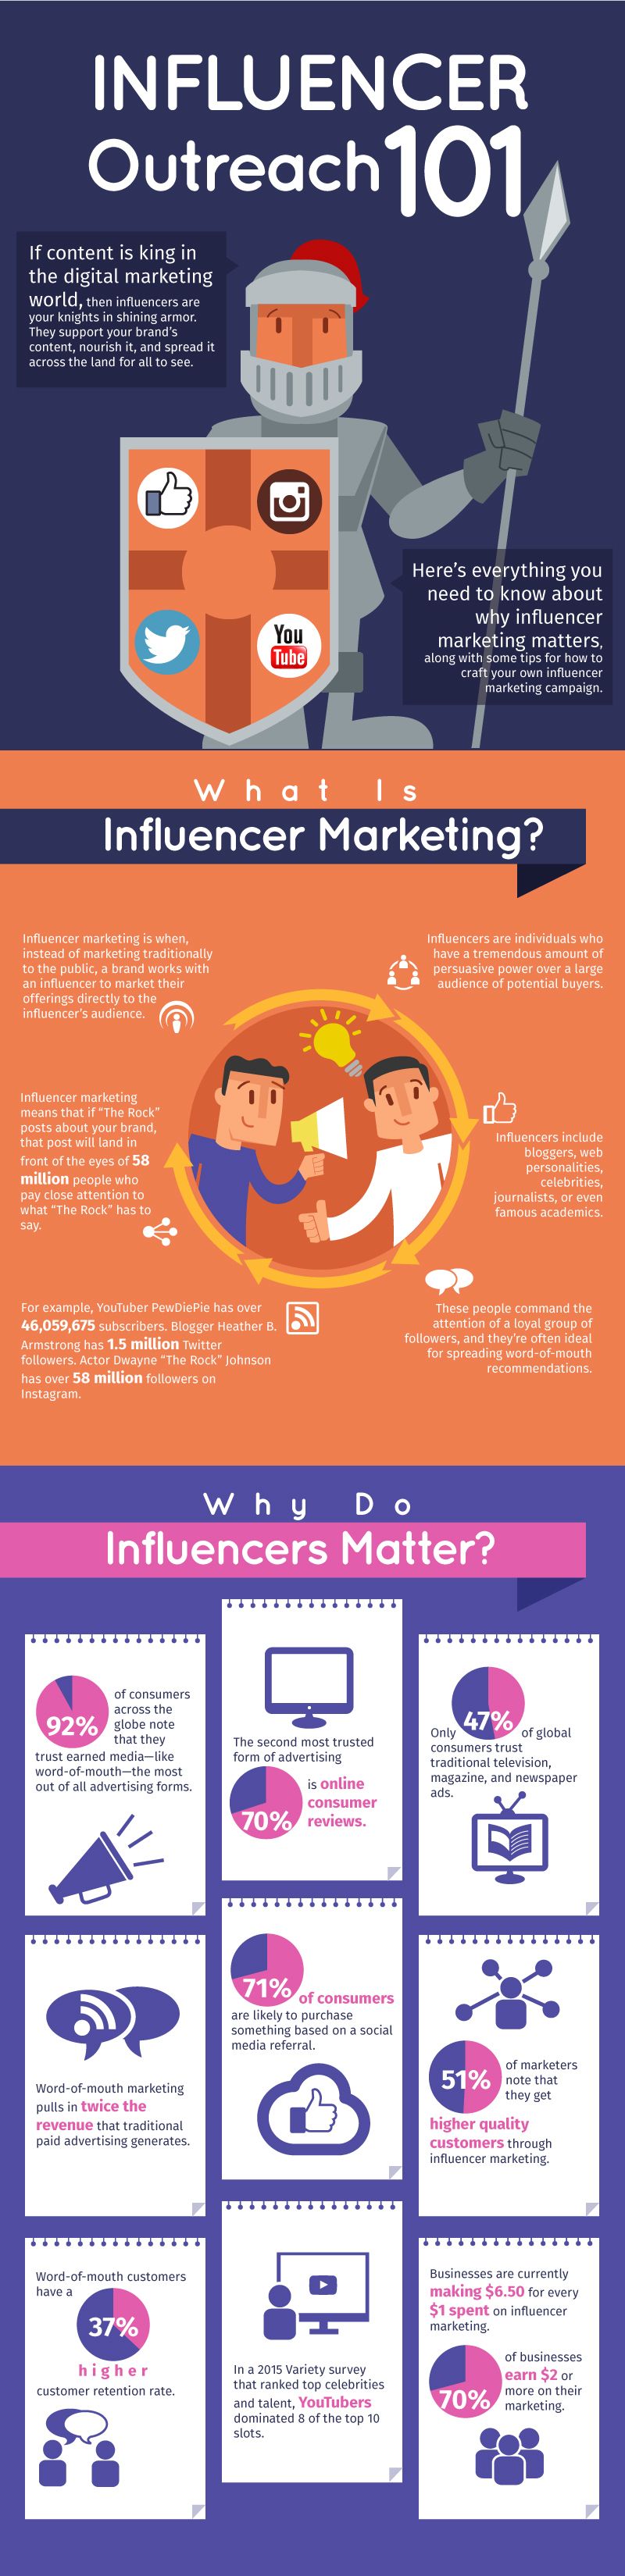 Guide to influencer marketing infographic